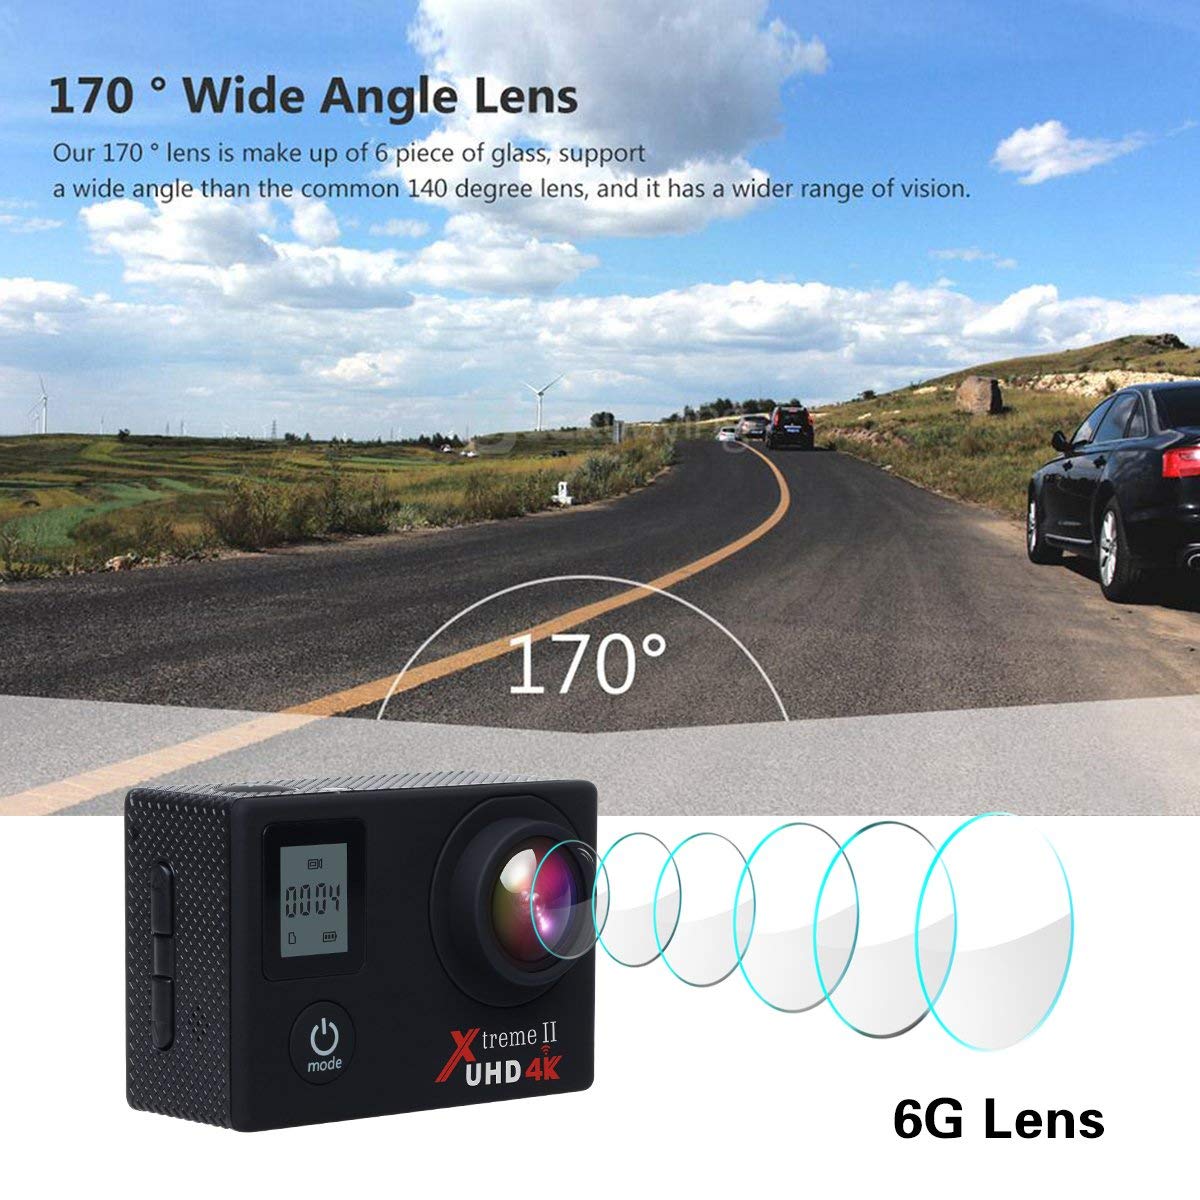 Campark ACT76 Action Camera has a 170°wide angle lens